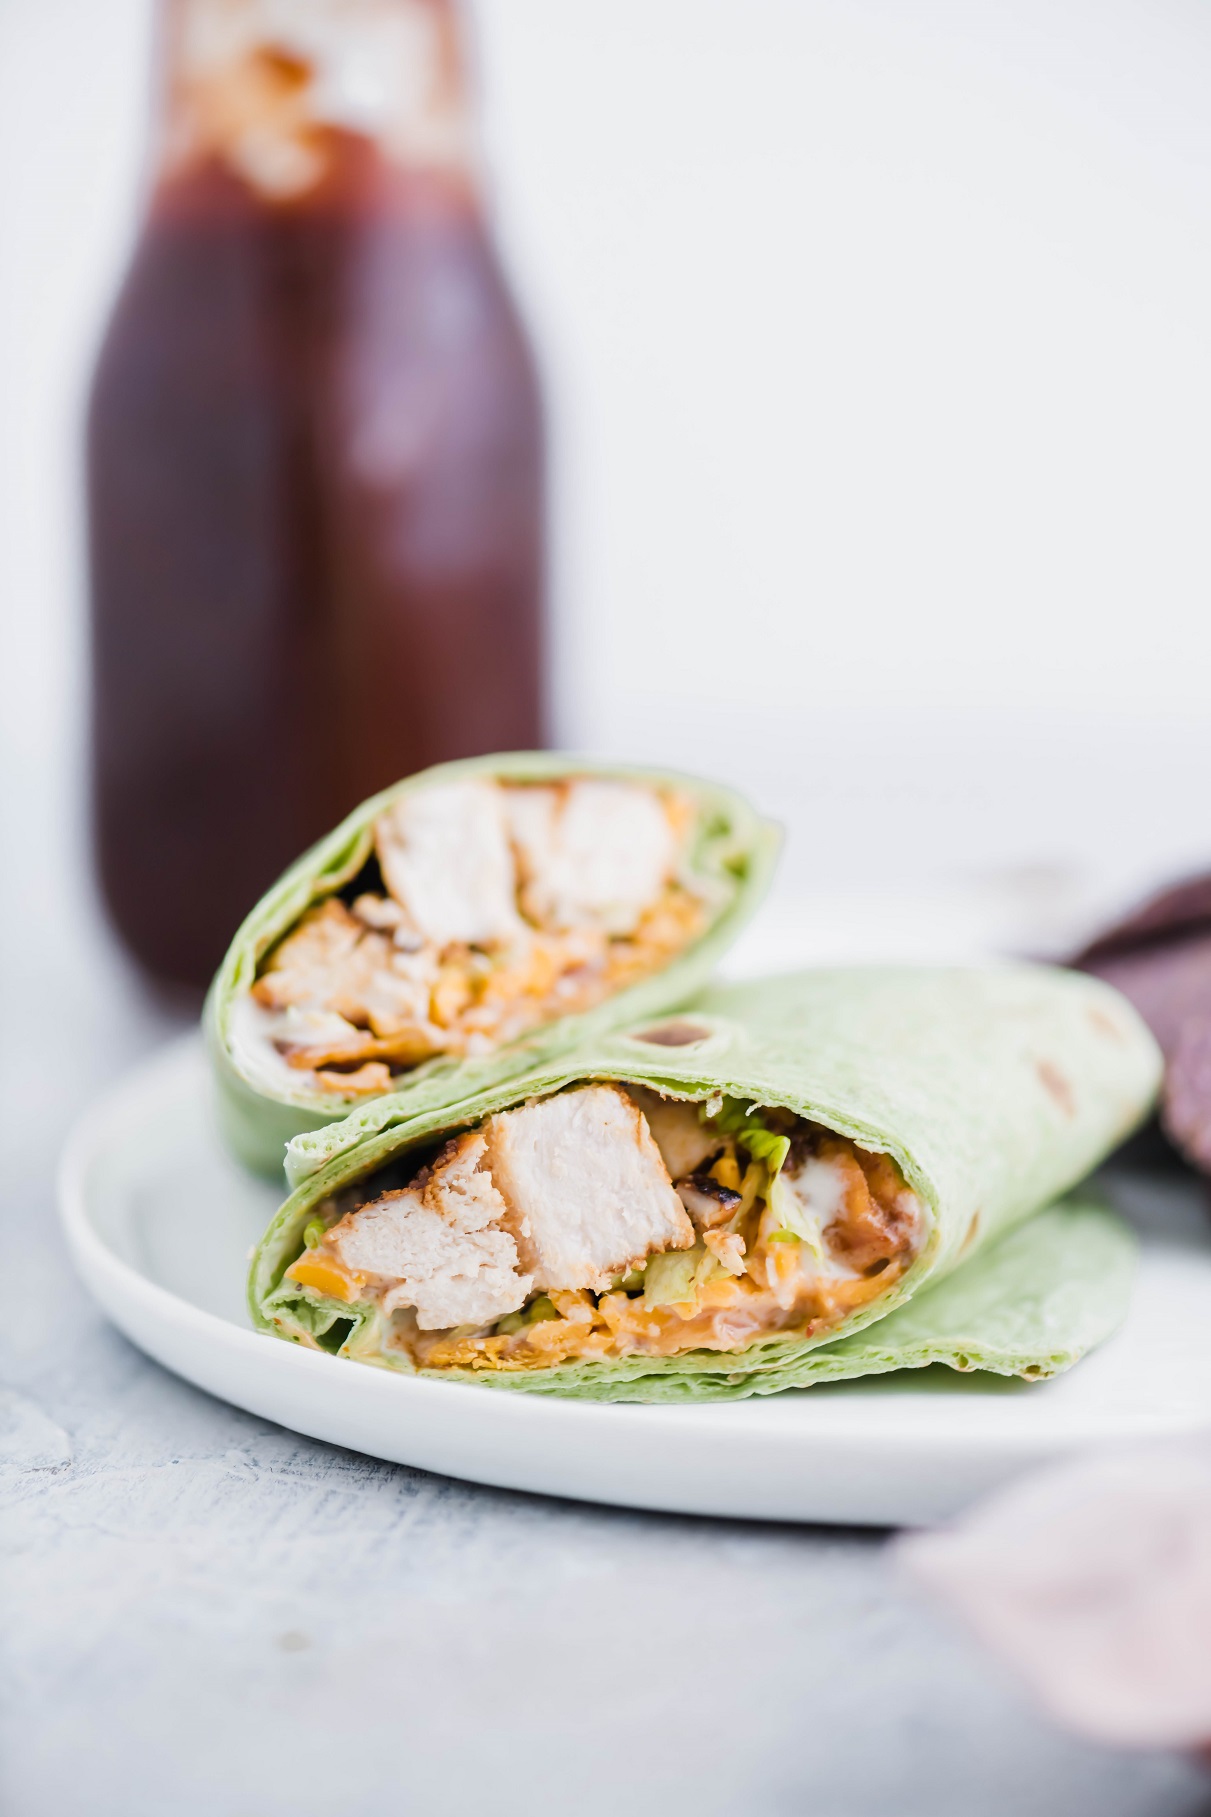 BBQ Chicken Wrap sliced on the diagonal on a white plate with blue corn toritlla chips.